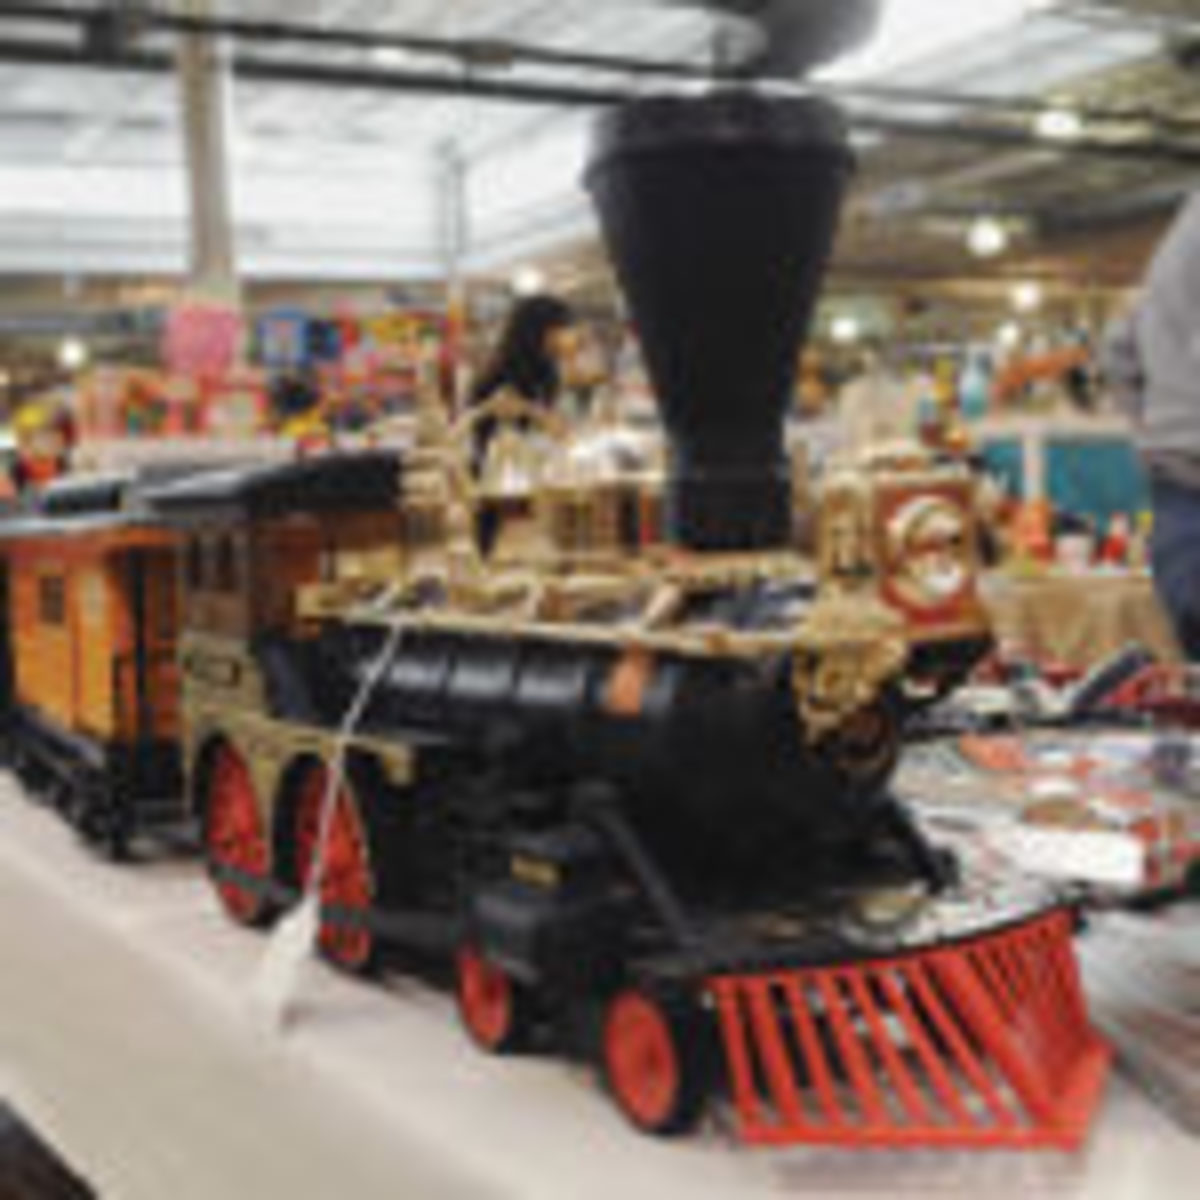 A train sits on display in a vendor’s booth at the January Scott Antique Markets show in Columbus, Ohio.